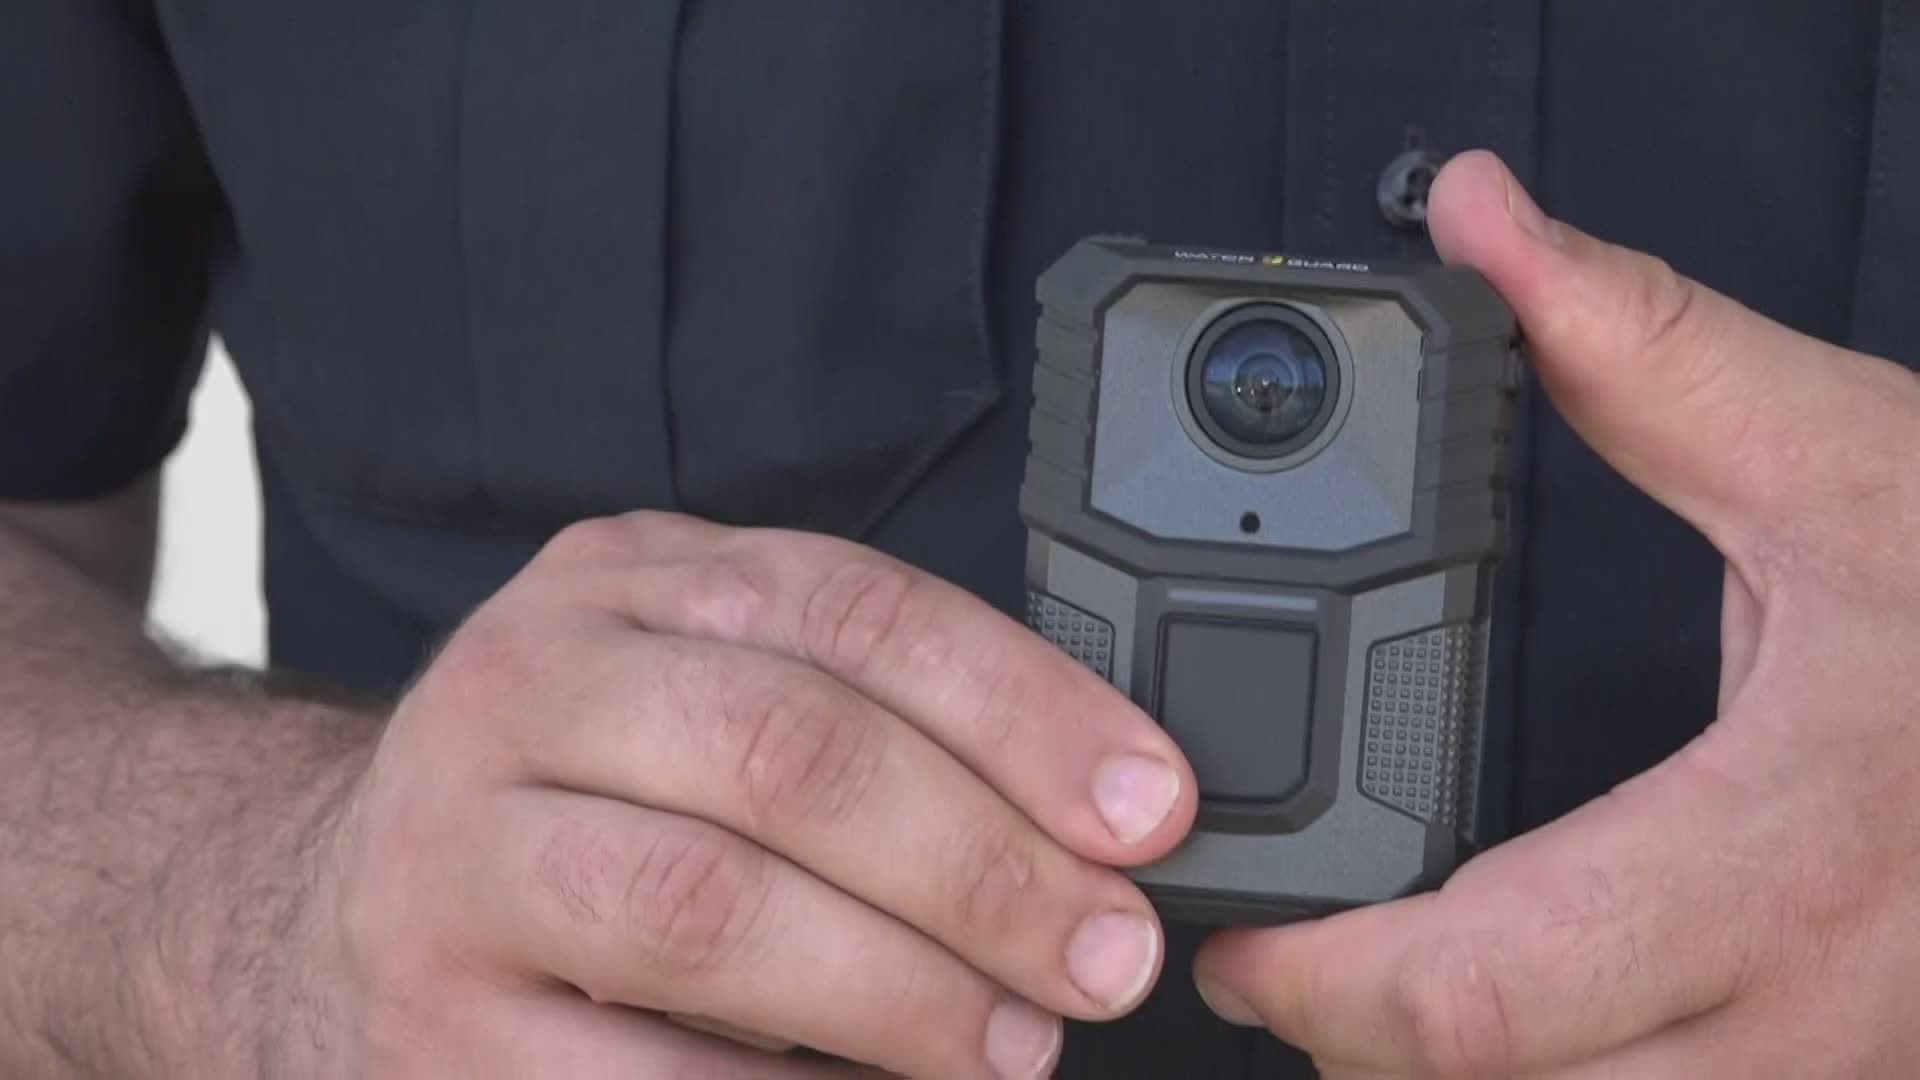 By next Monday all of the Bangor Police Department will be wearing these body-cams as part of their uniform.